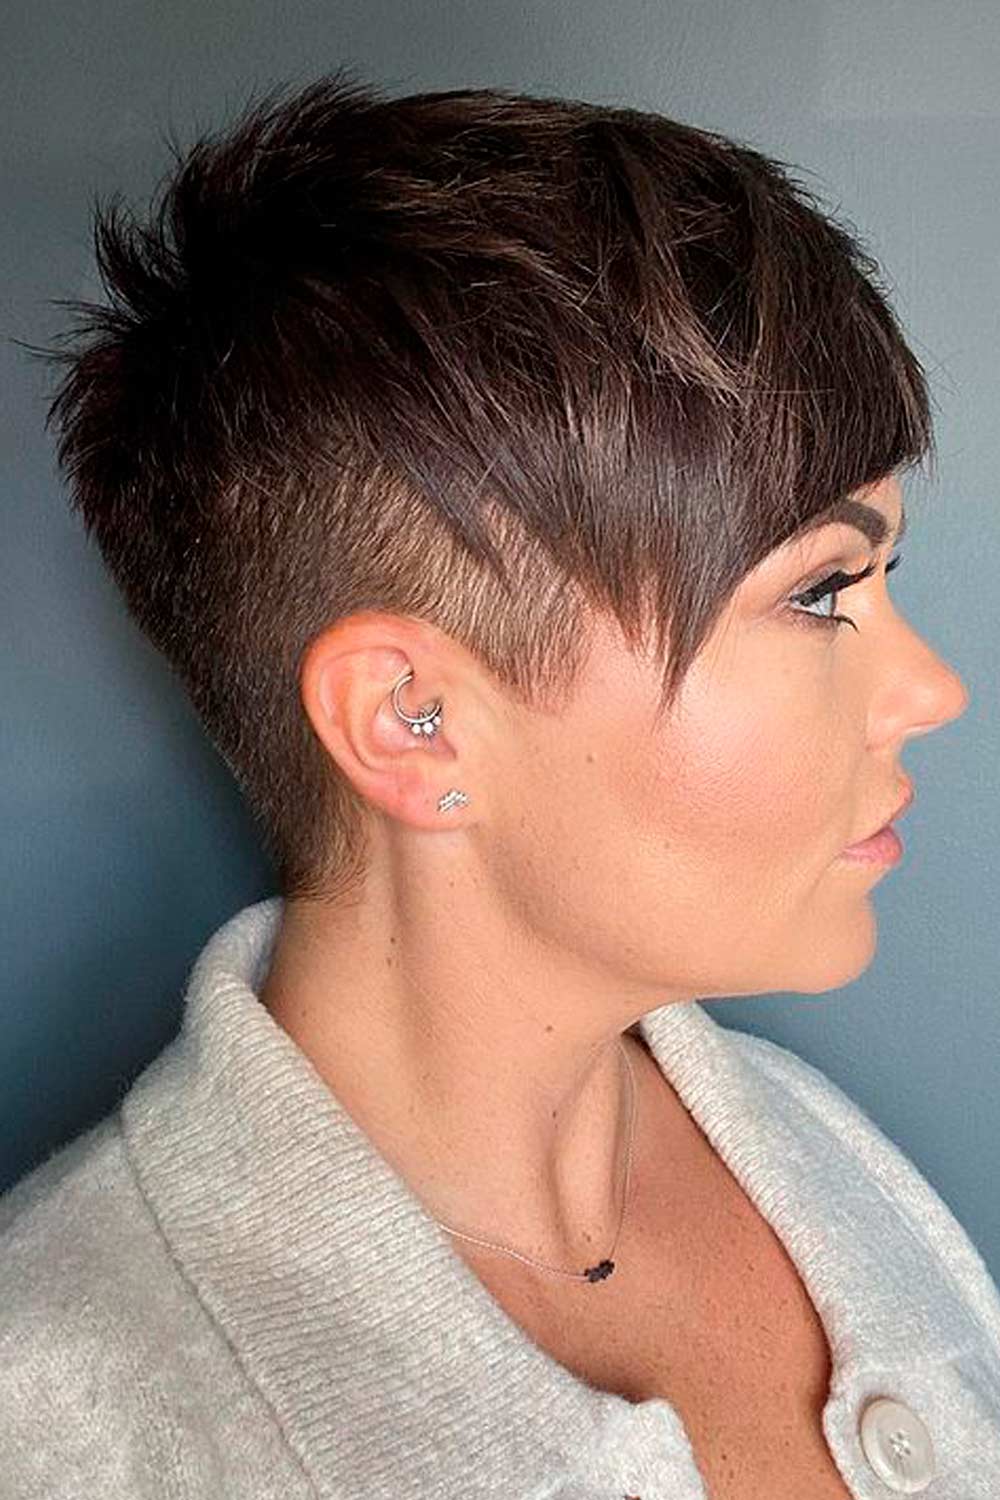 Short Edgy Pixie Hairstyle